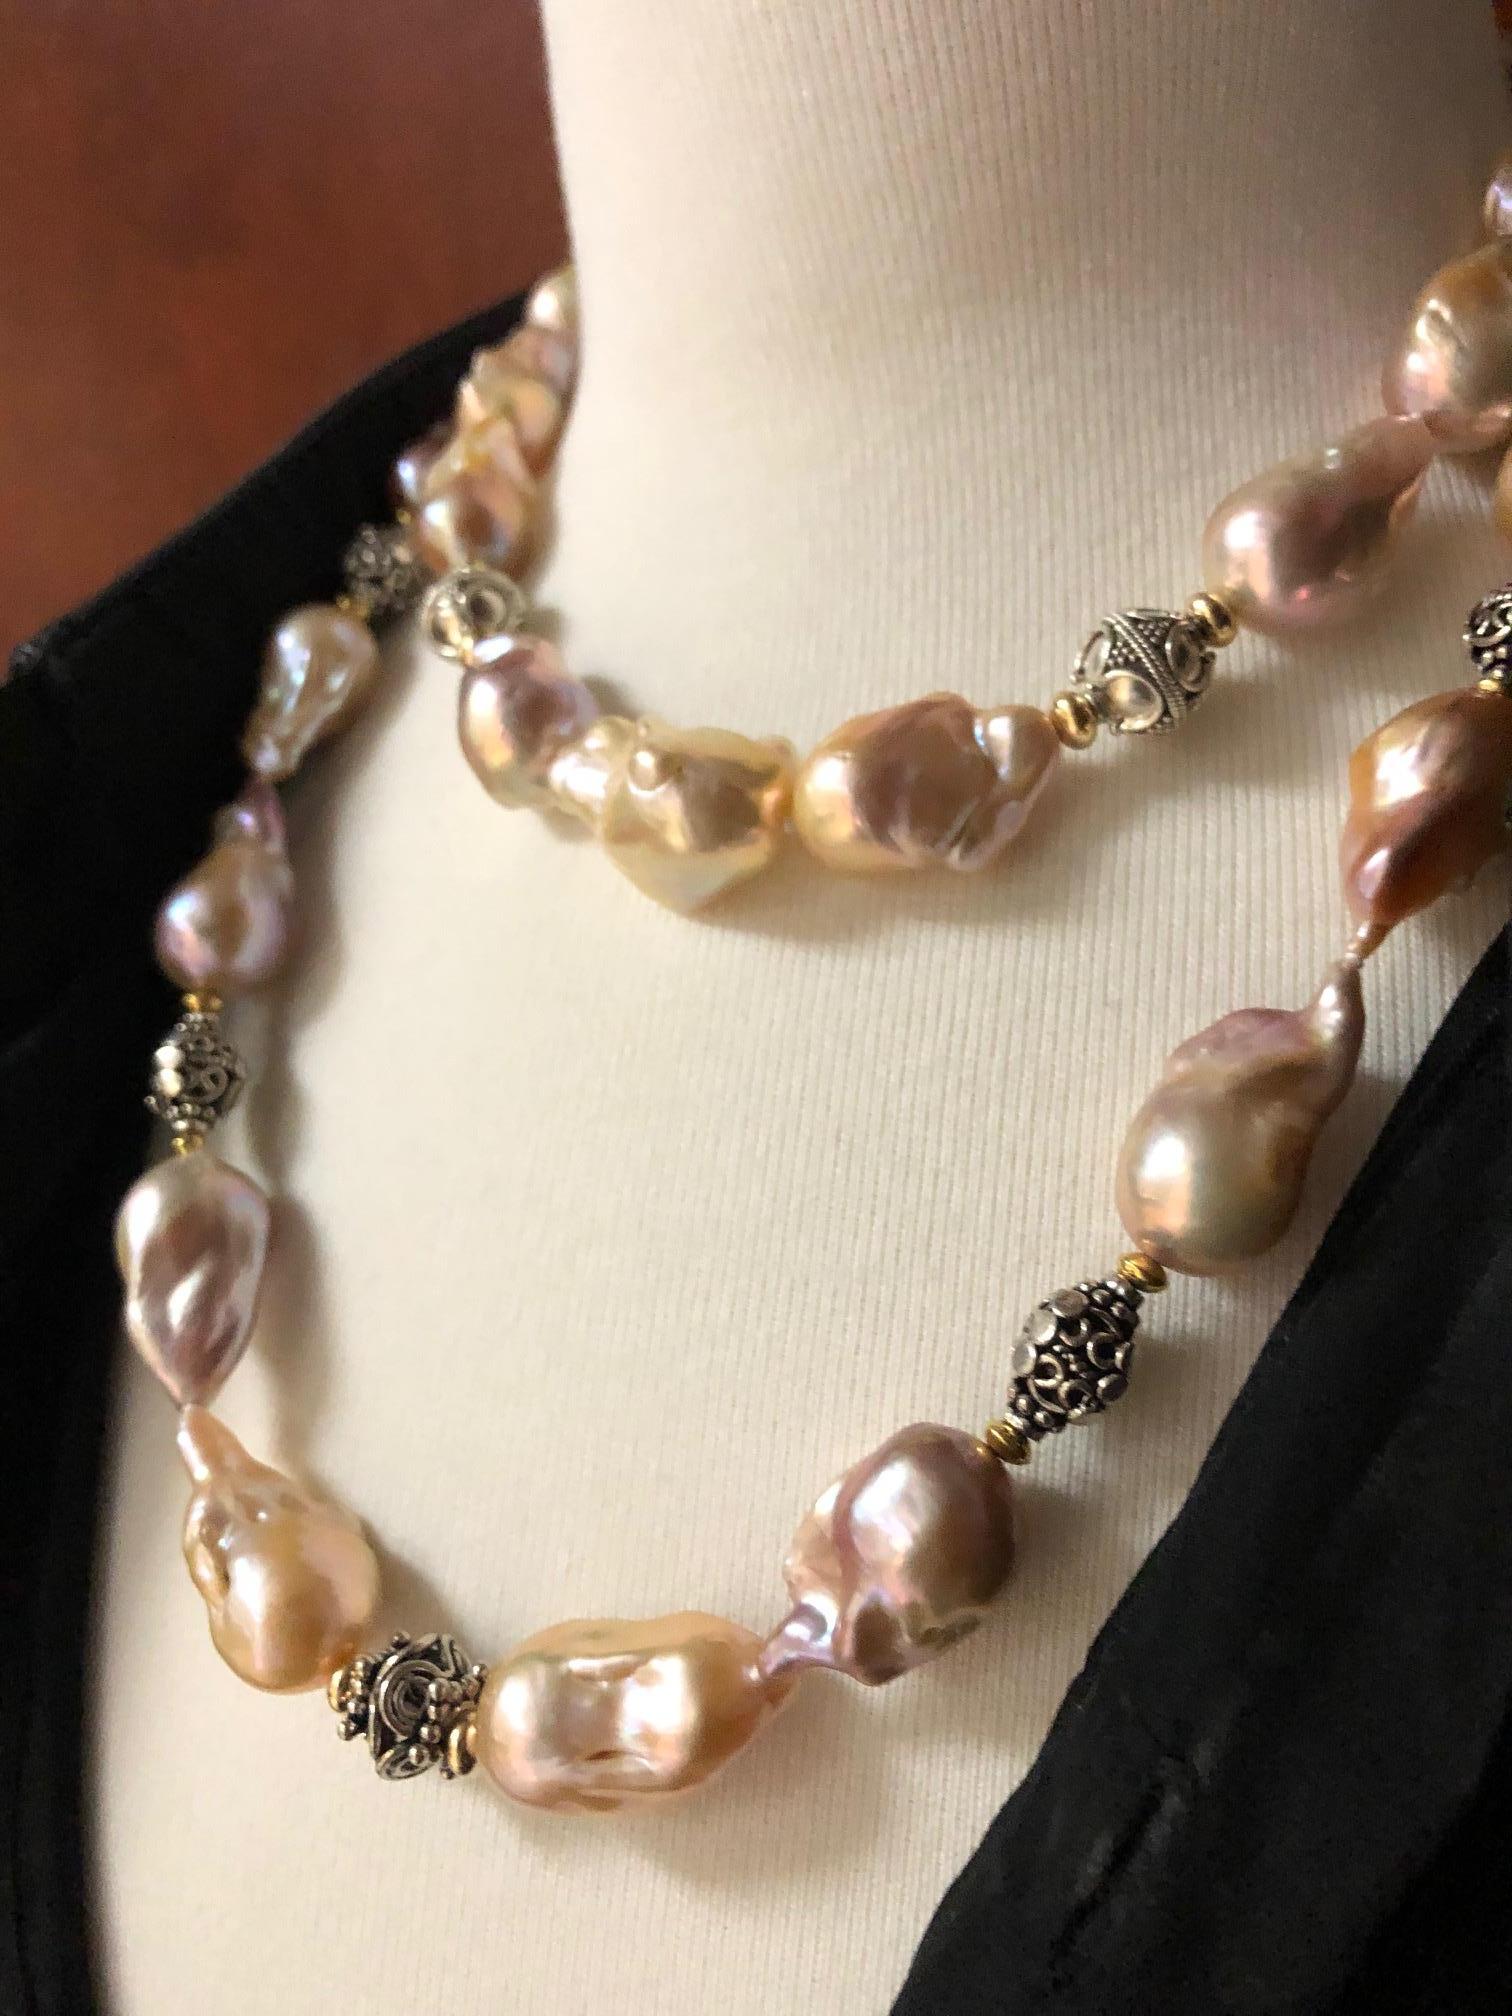 Women's Baroque Pearl Necklace with Silver, 18k and 22k Yellow Gold Accents and Clasp